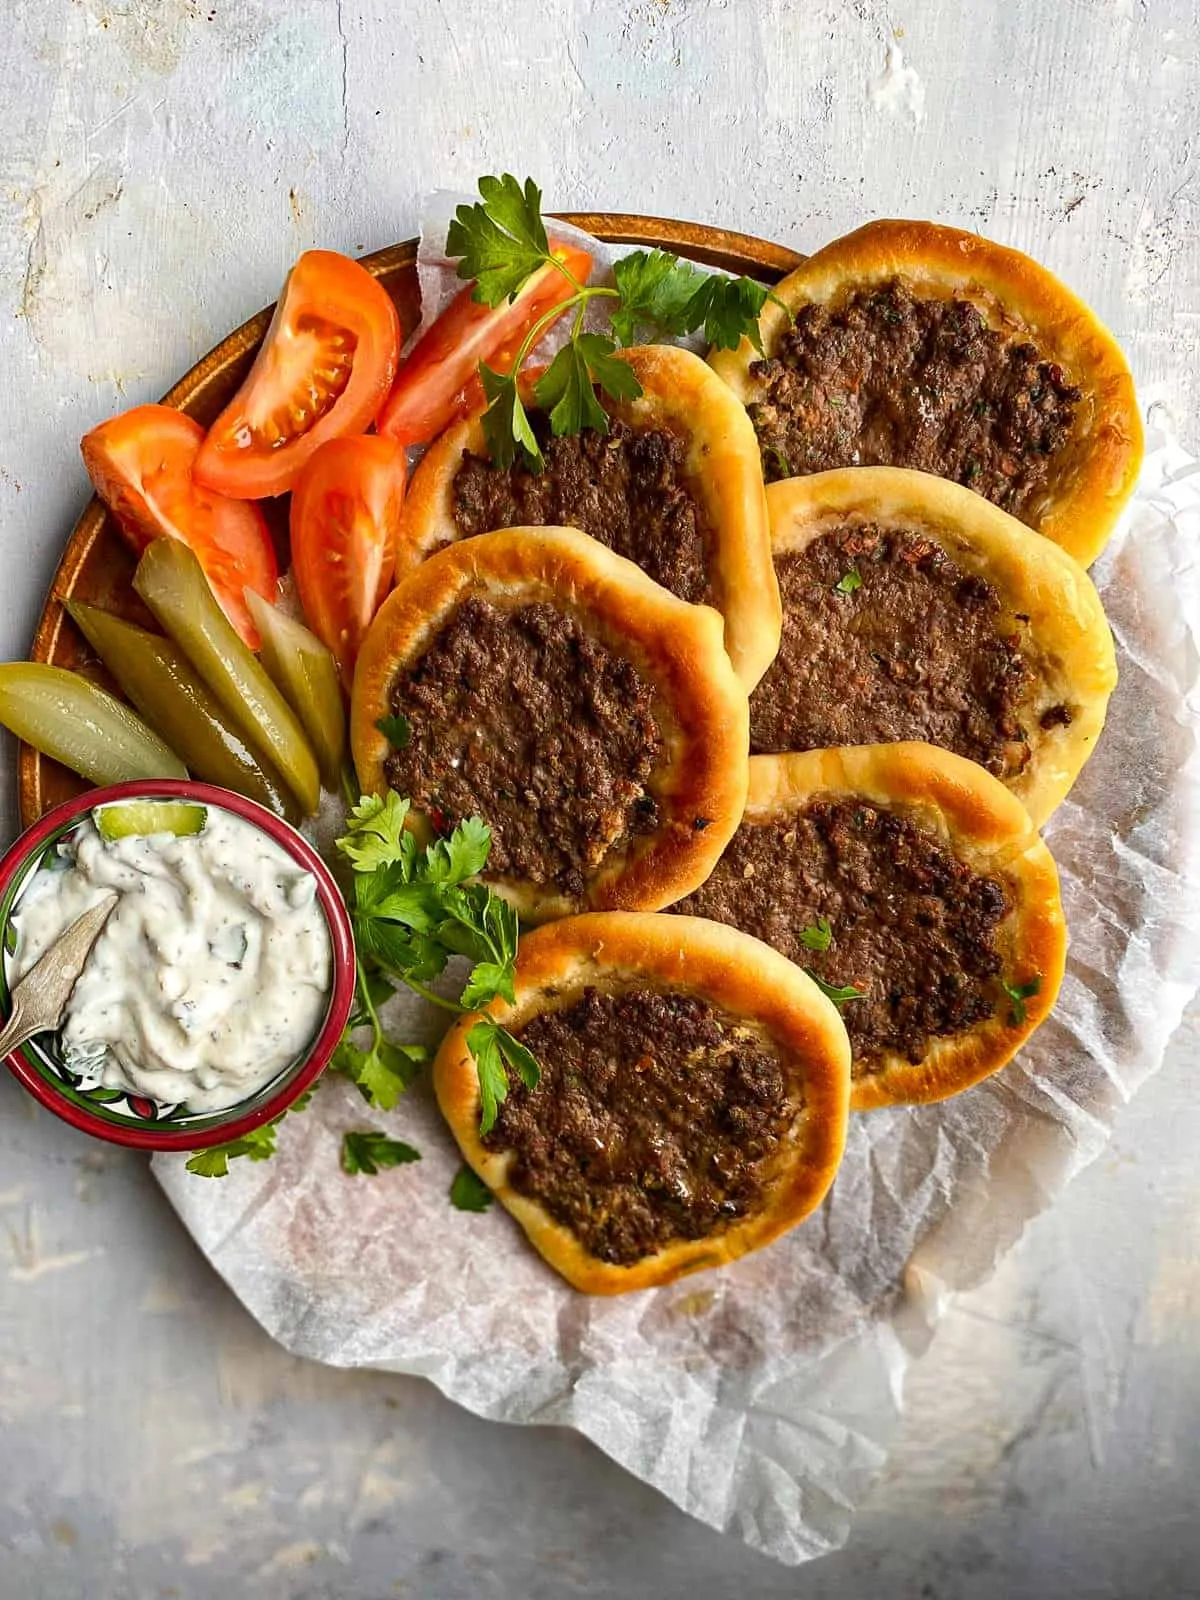 sfeeha (Middle Eastern Meat Pie) on a plate with cut tomatoes, pickles, and yogurt sauce